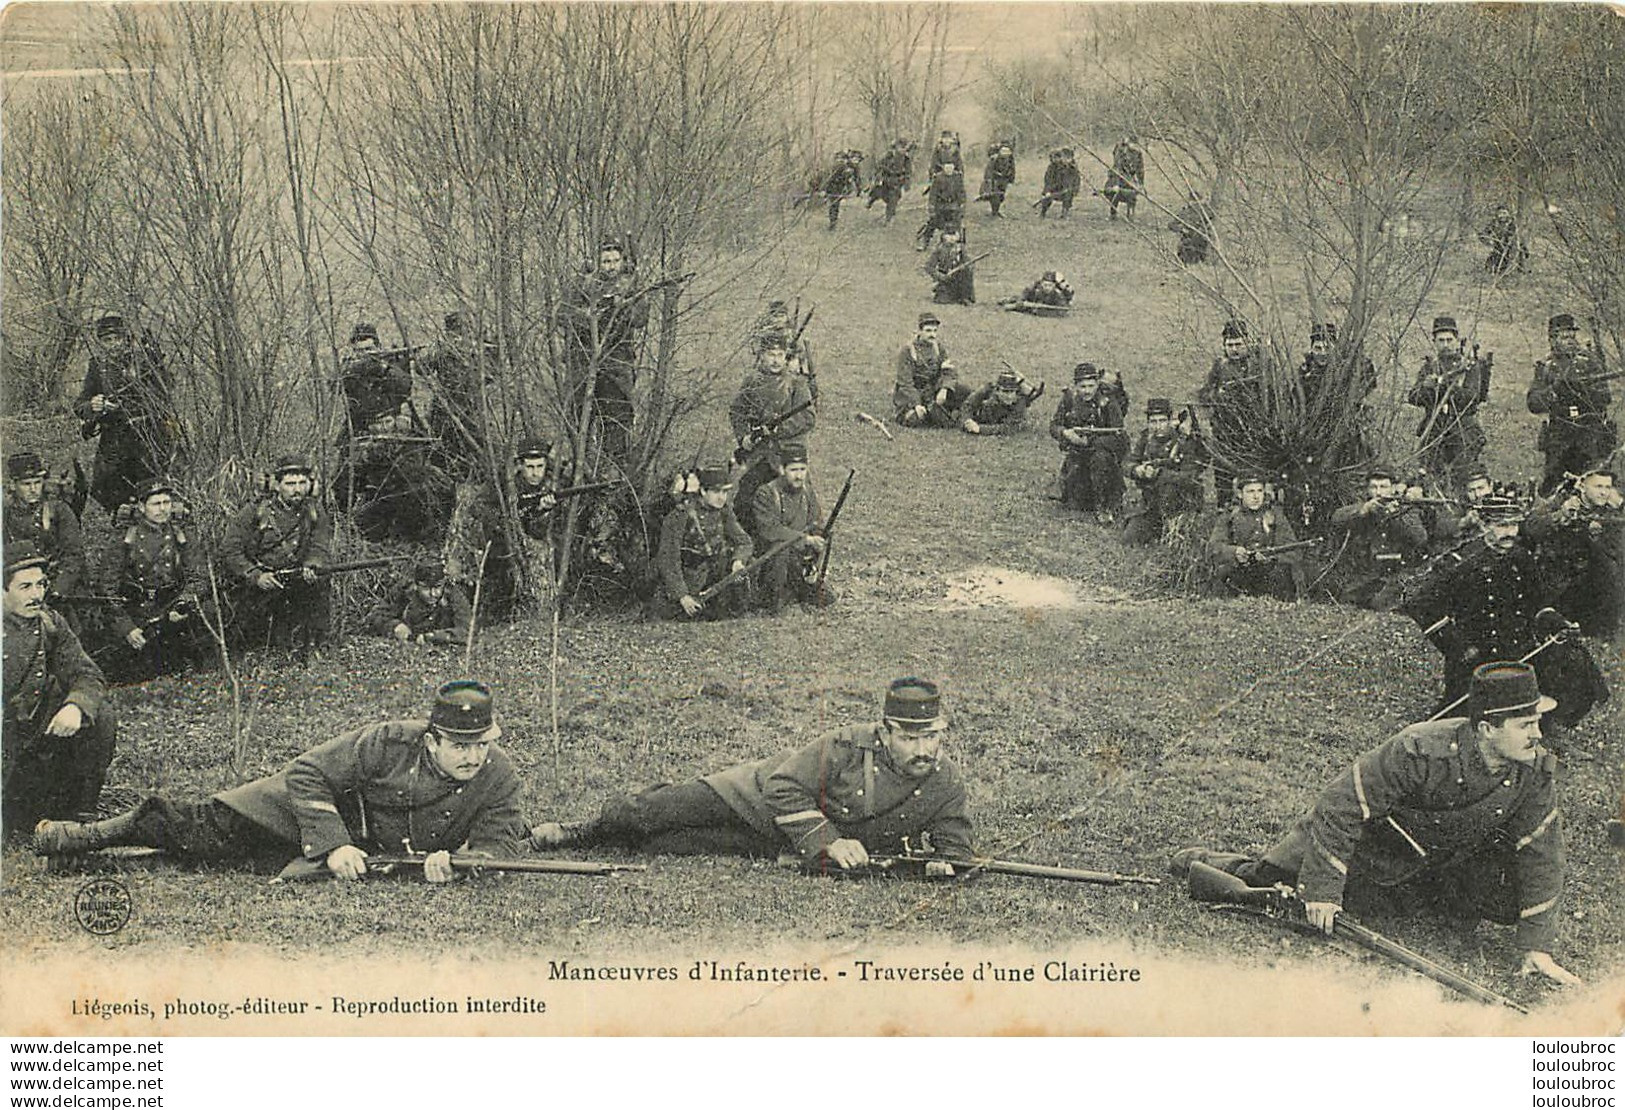 MANOEUVRES D'INFANTERIE TRAVERSEE D'UNE CLAIRIERE - Manoeuvres